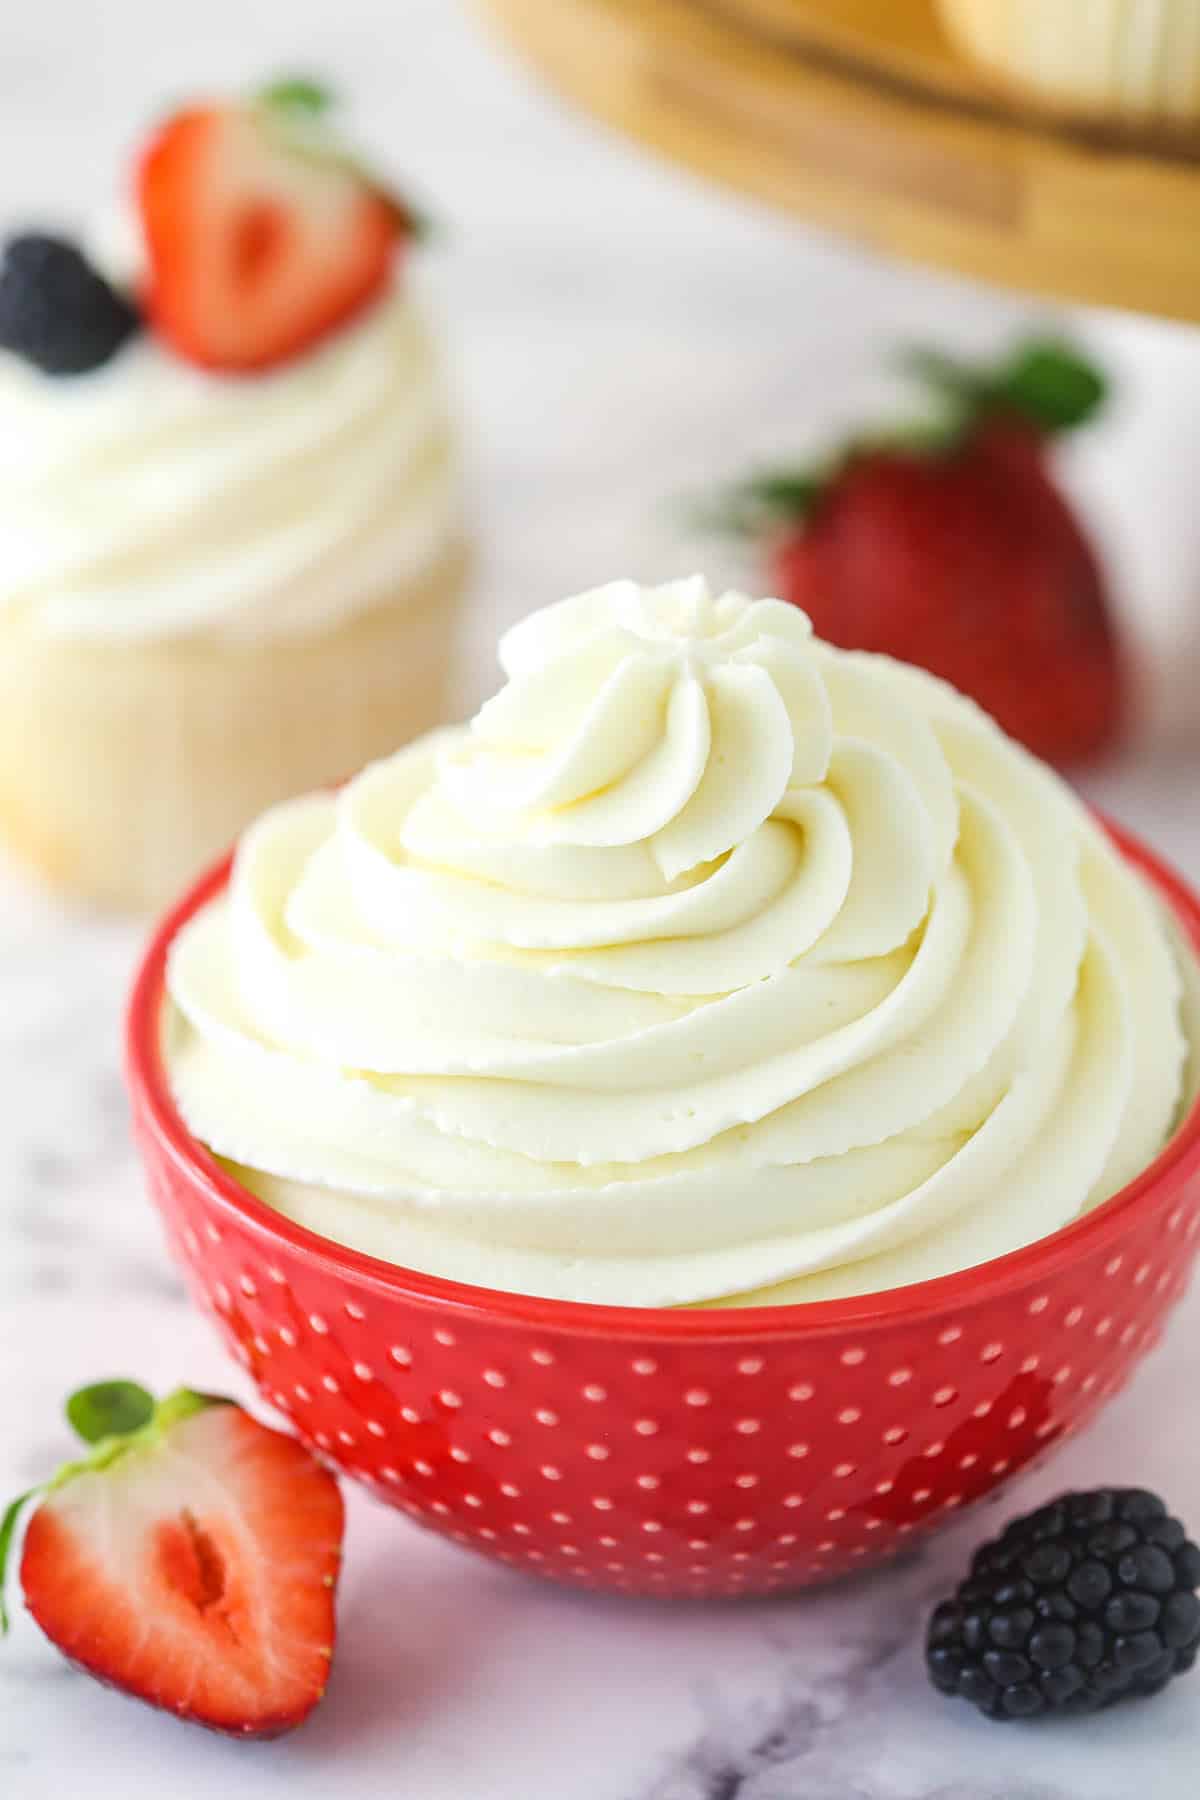 Whipped Cream Cheese Frosting | Life, Love and Sugar - My WordPress